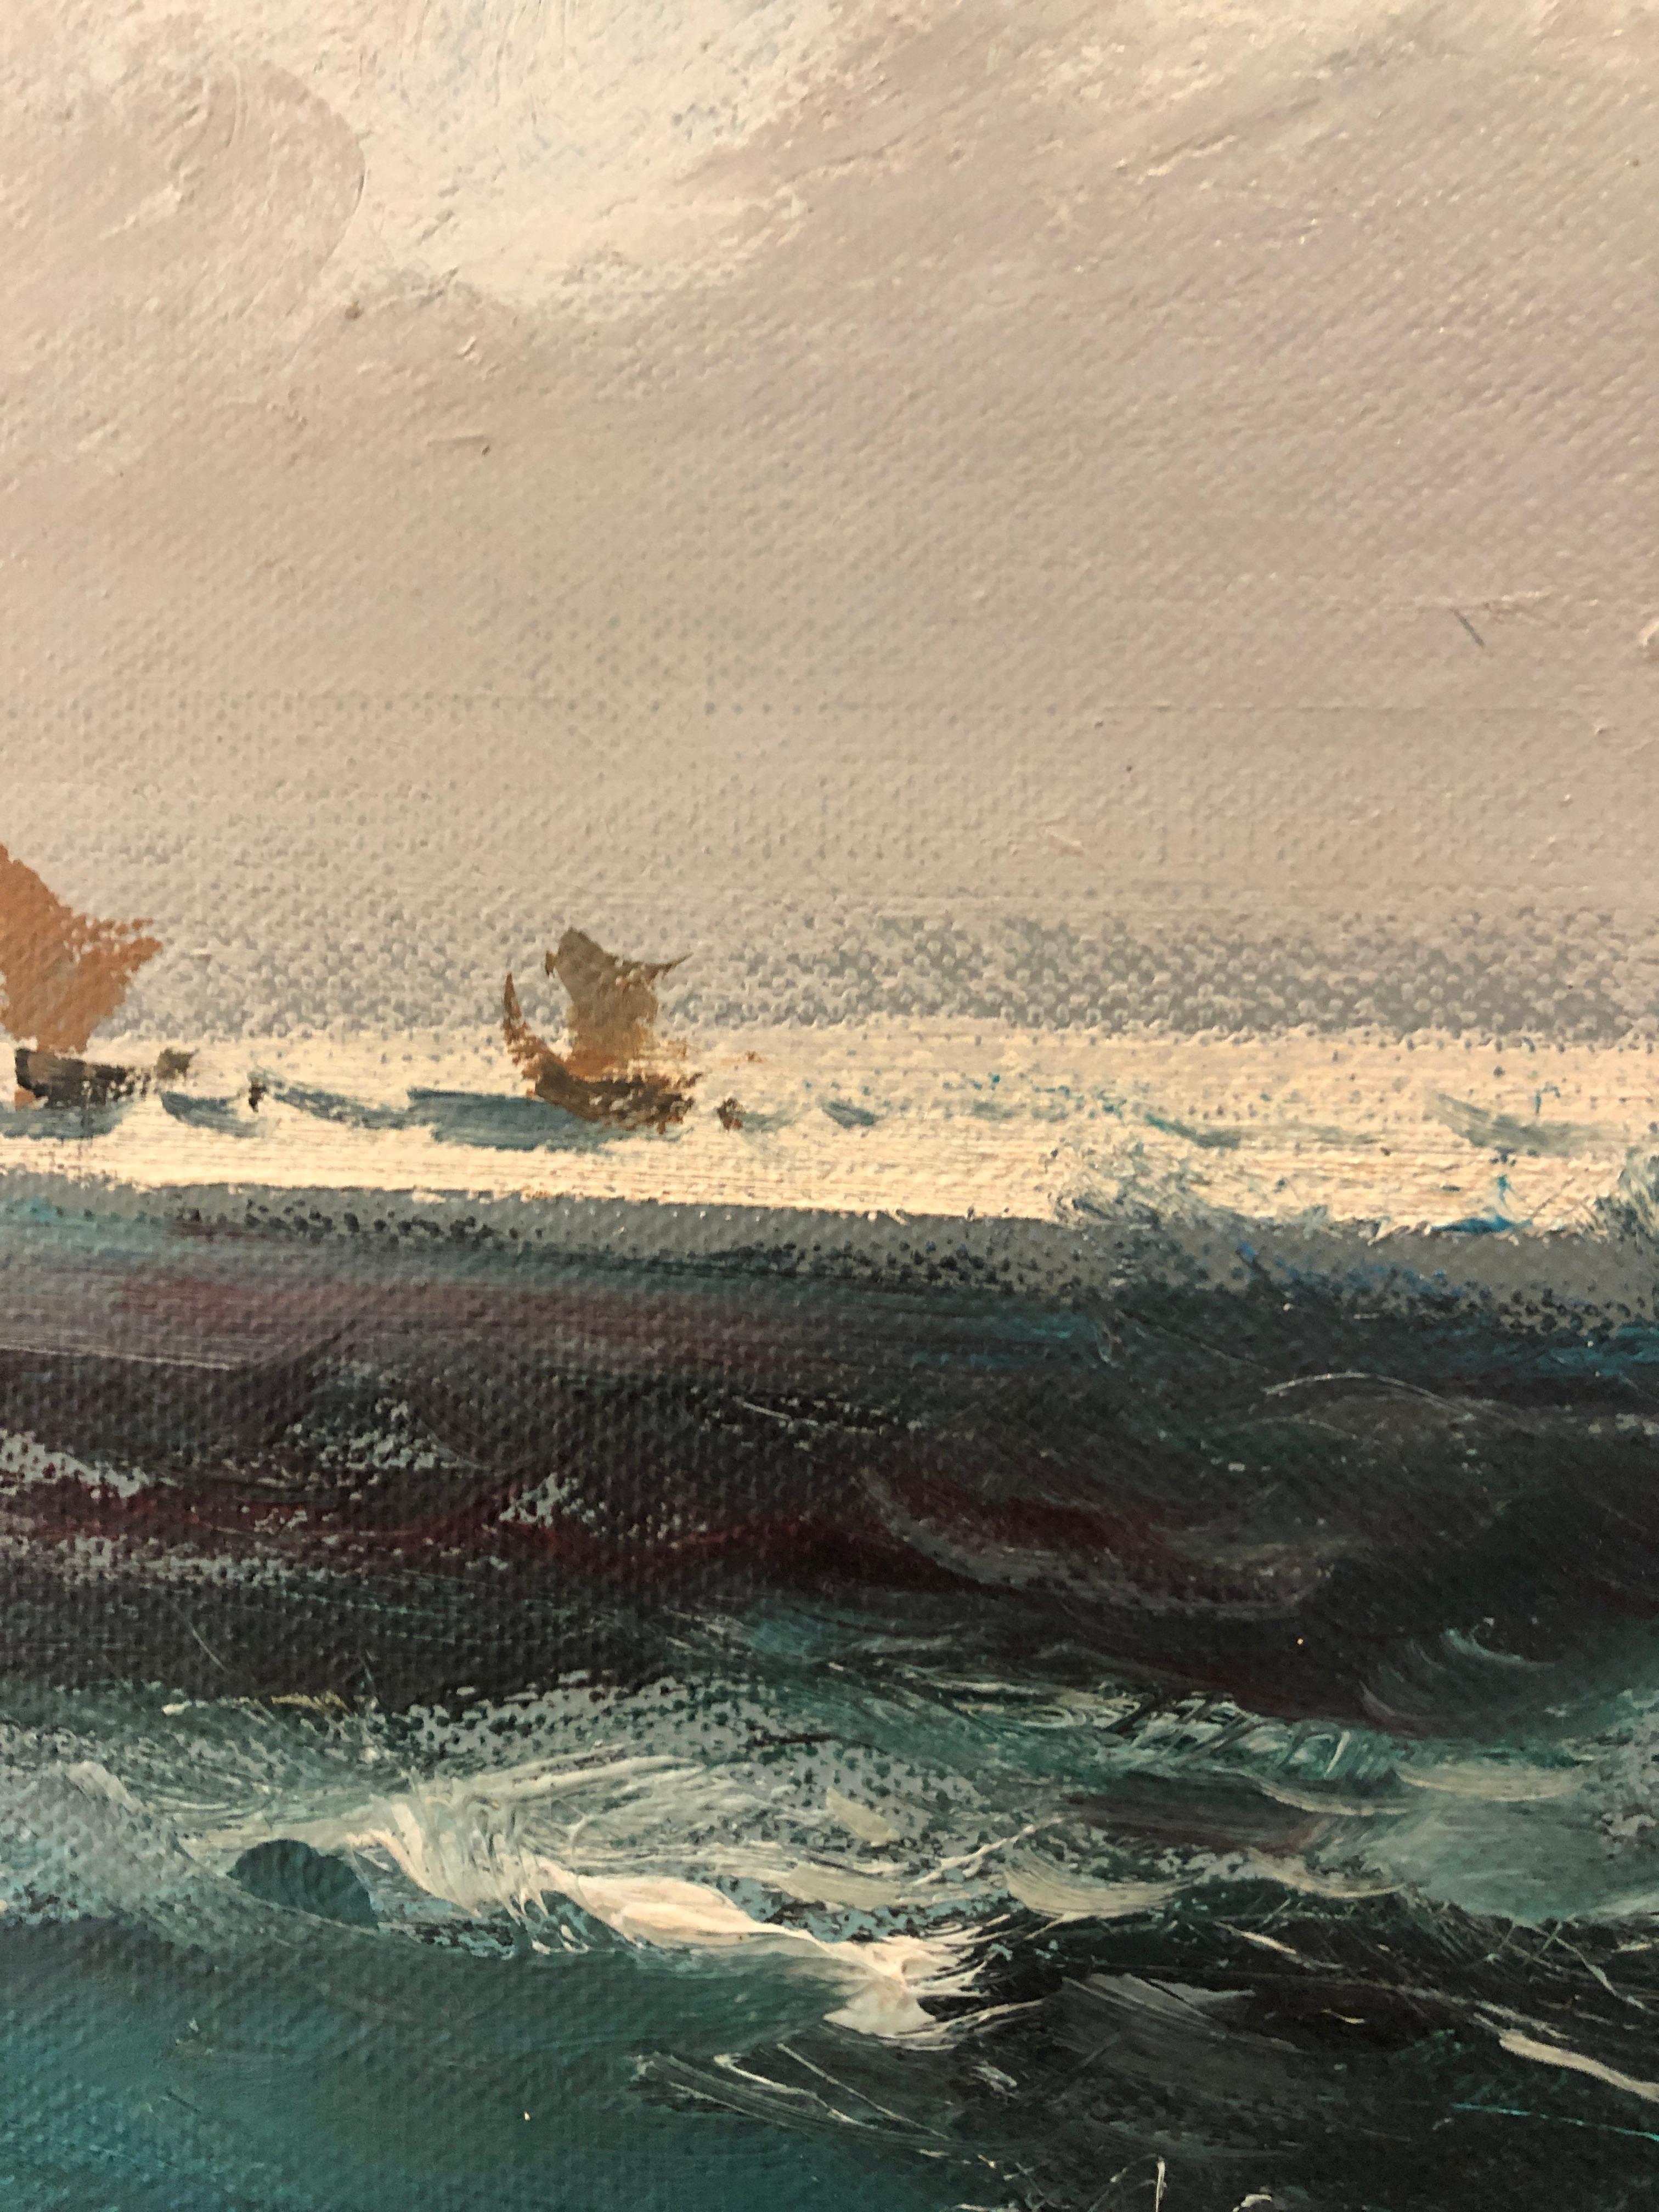 Sailboats at sea - Brown Landscape Painting by Ezelino Briante